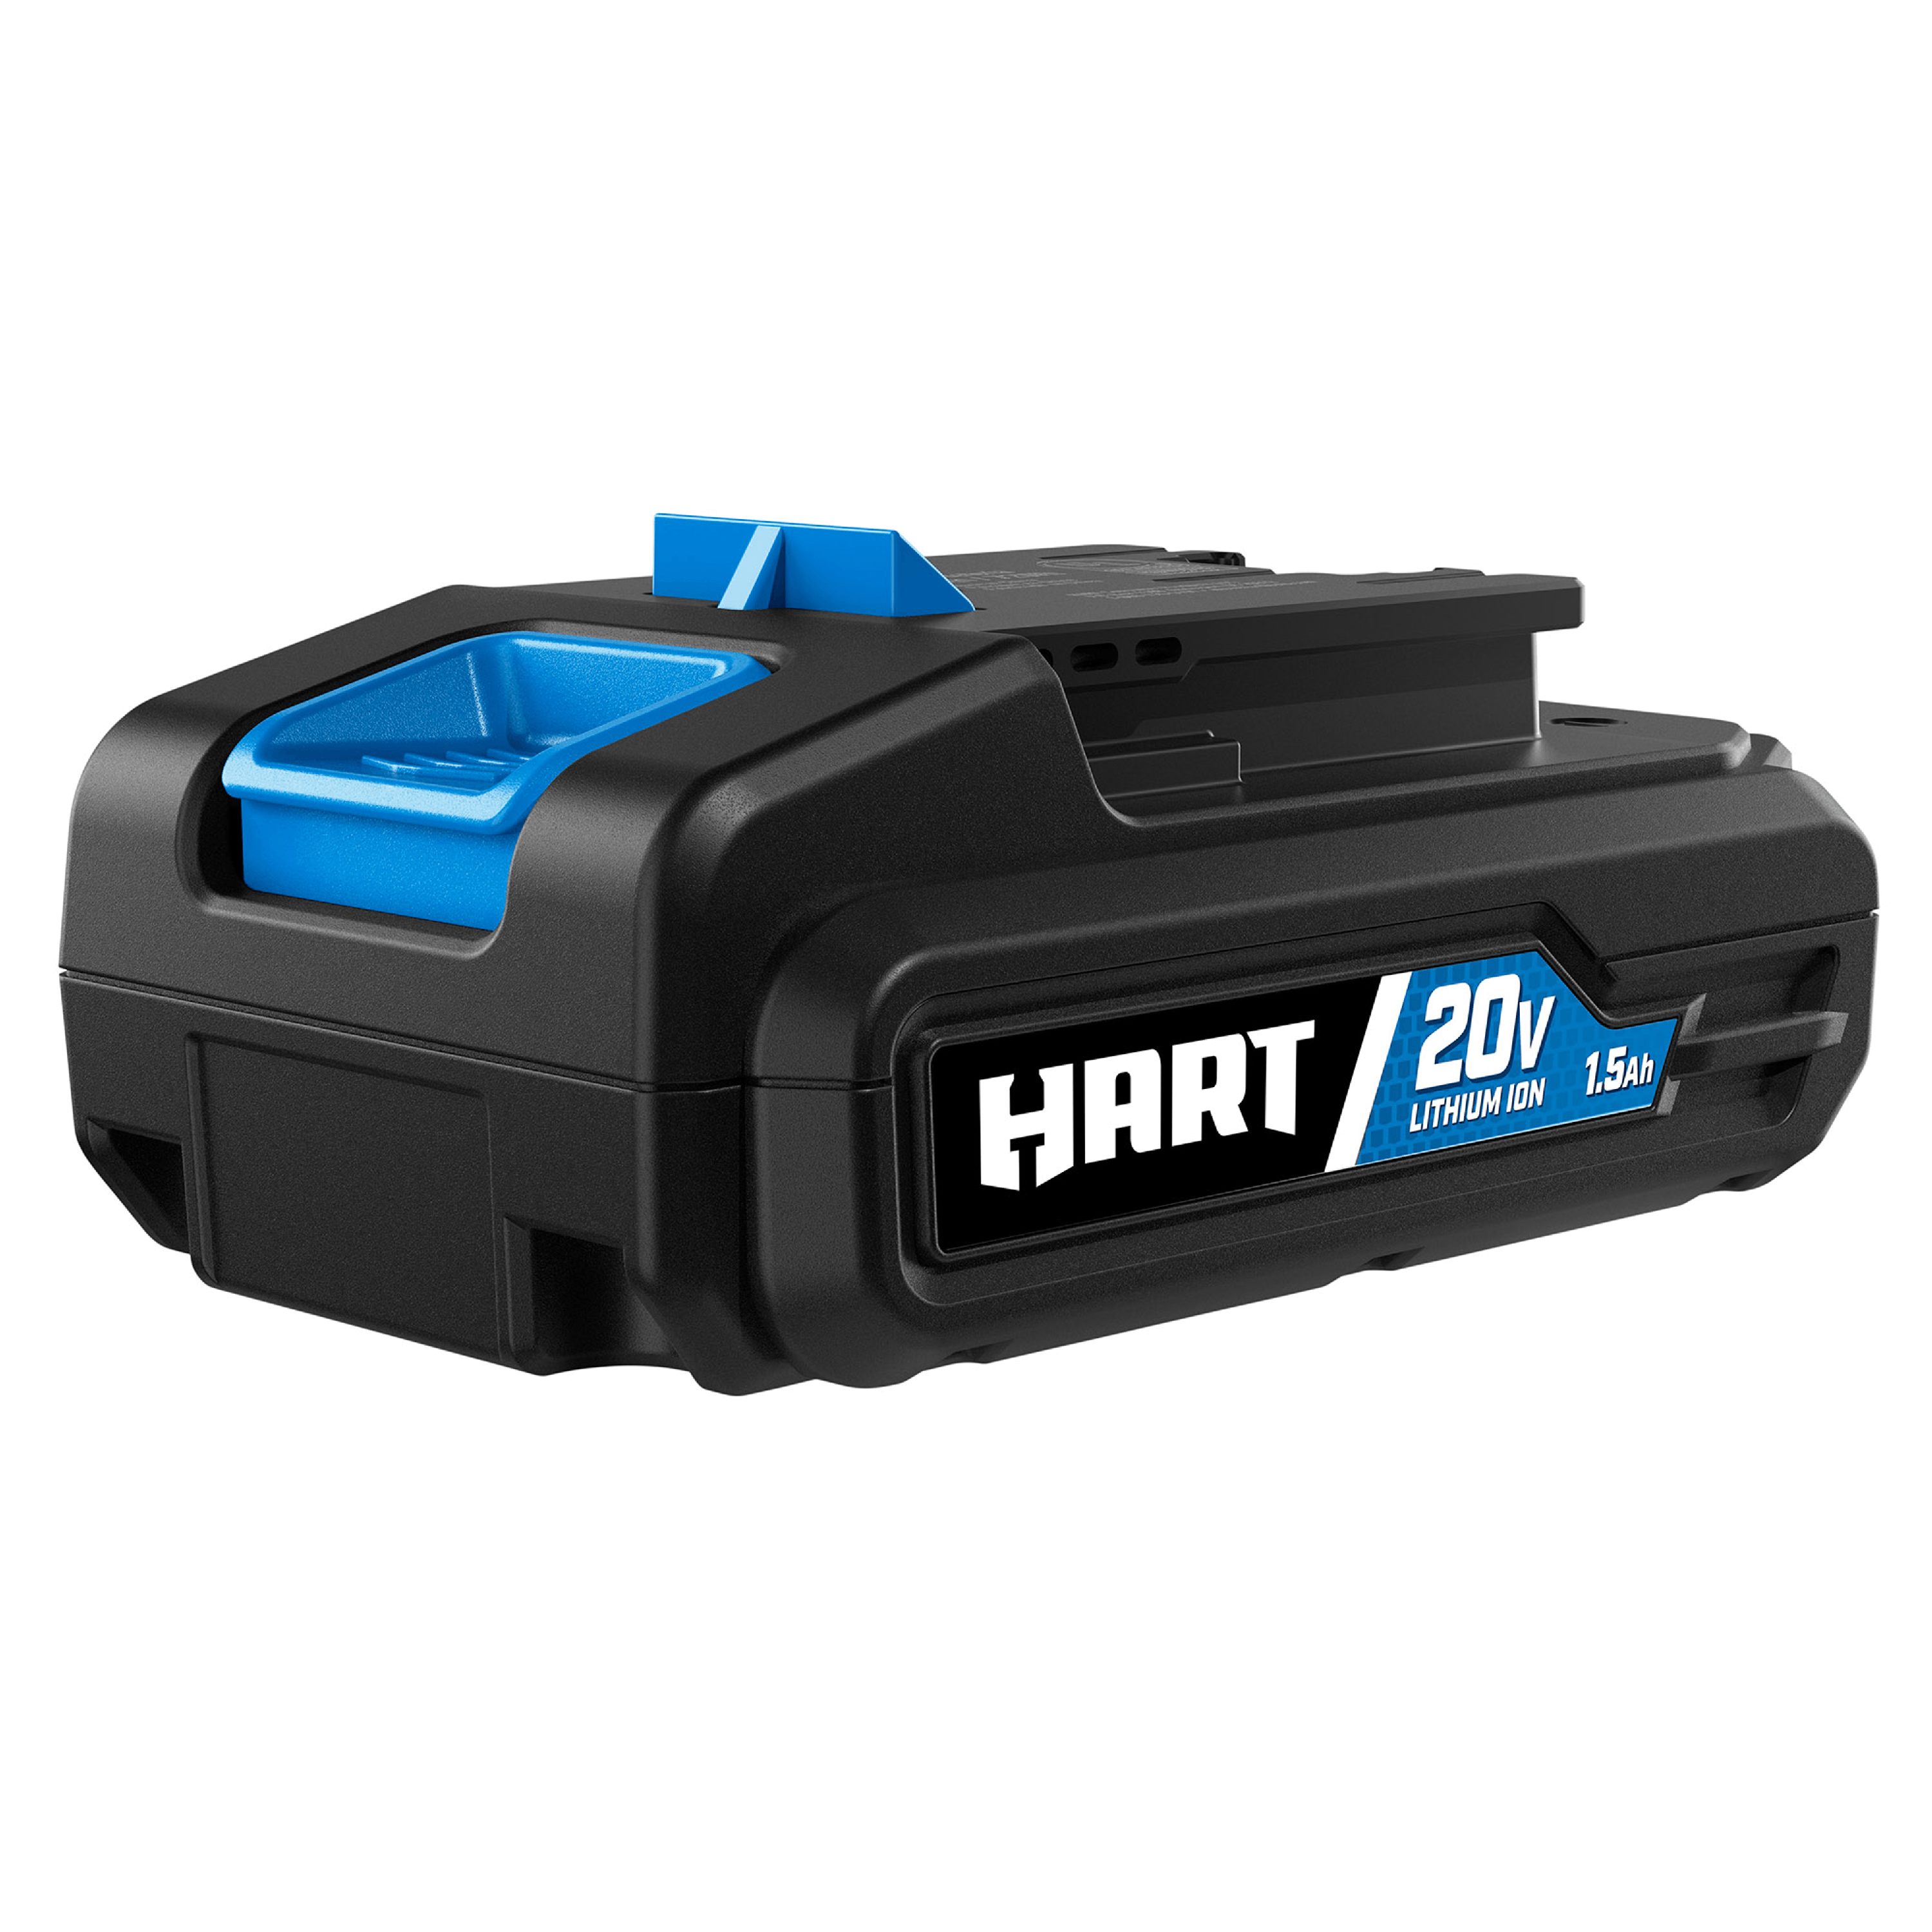 HART 20-Volt Cordless 1/2-inch Drill/Driver Kit (1) 1.5Ah Lithium-Ion Battery - image 13 of 17